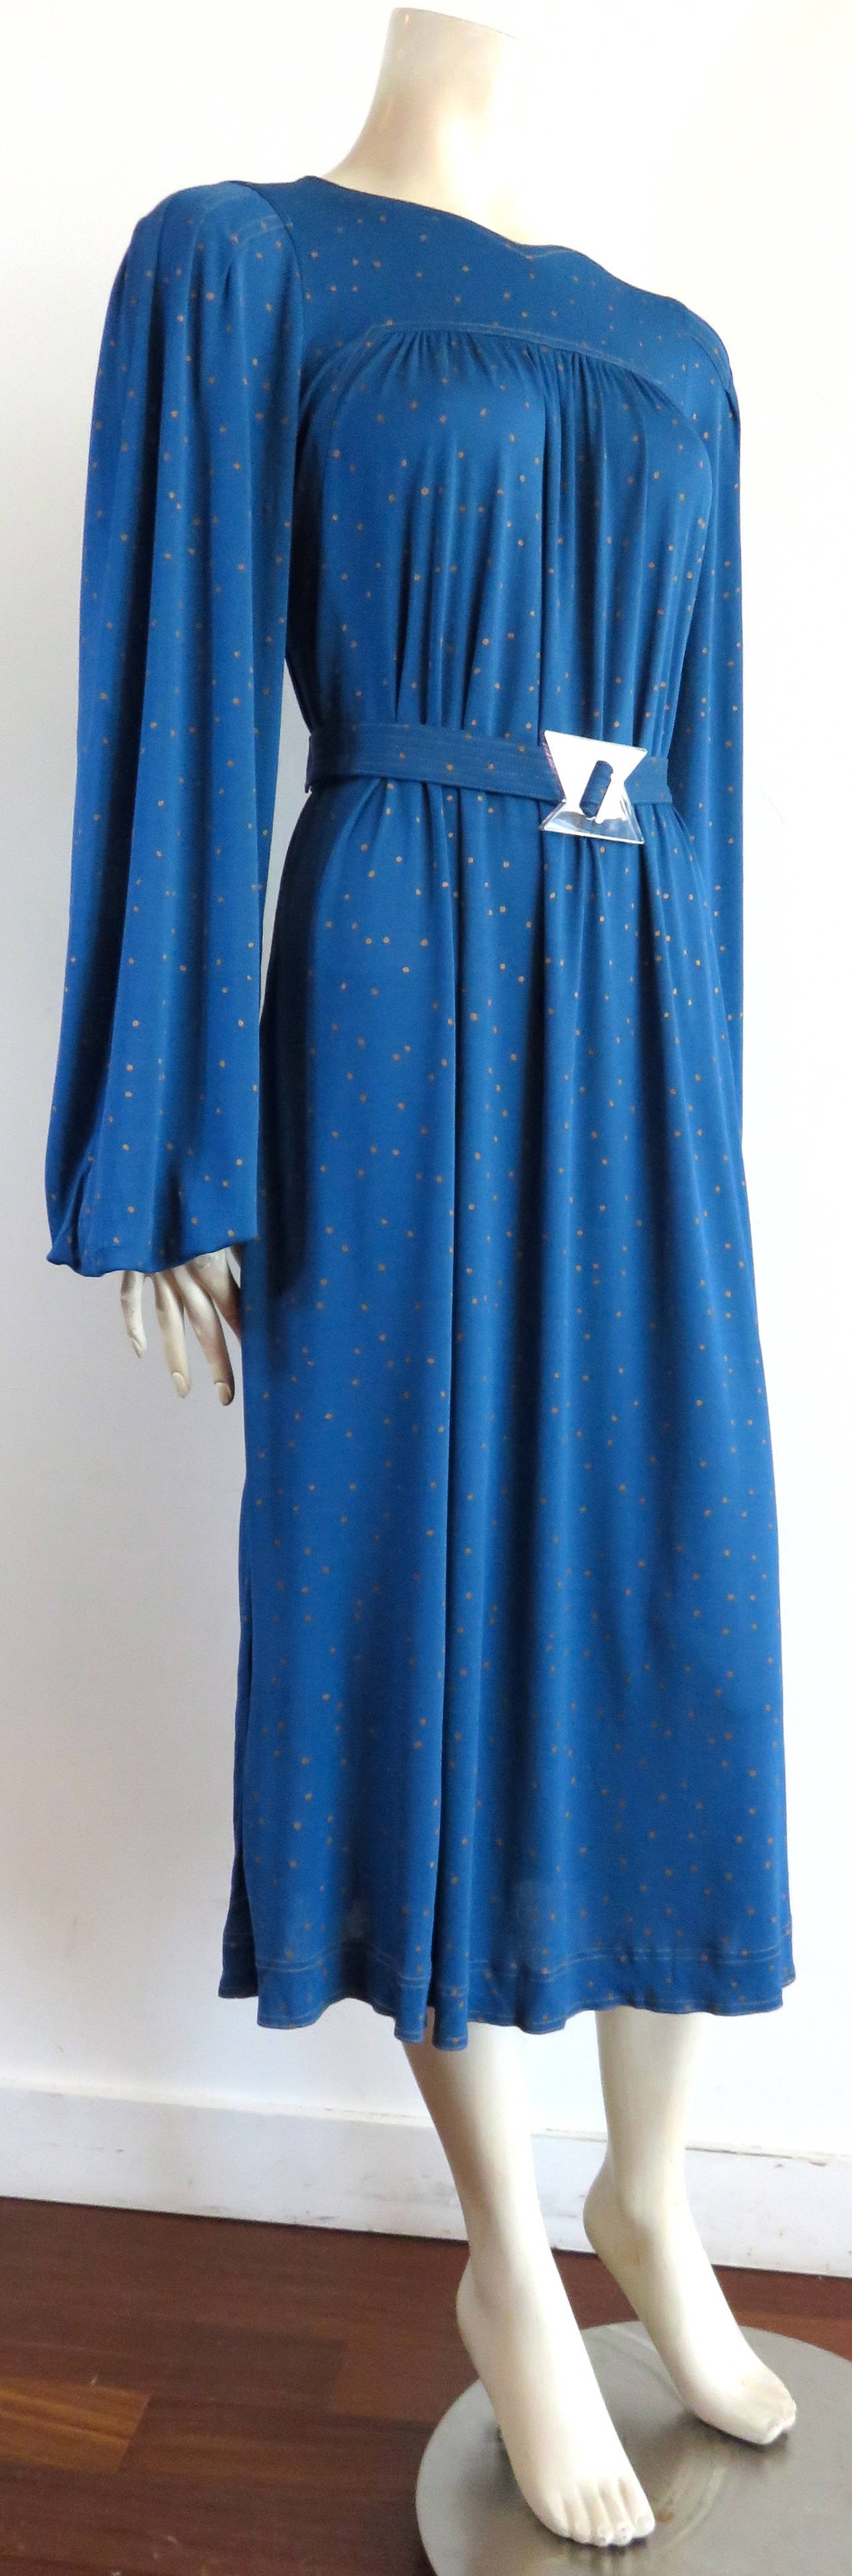 1970's JEAN MUIR Belted dress with provenance In Good Condition For Sale In Newport Beach, CA